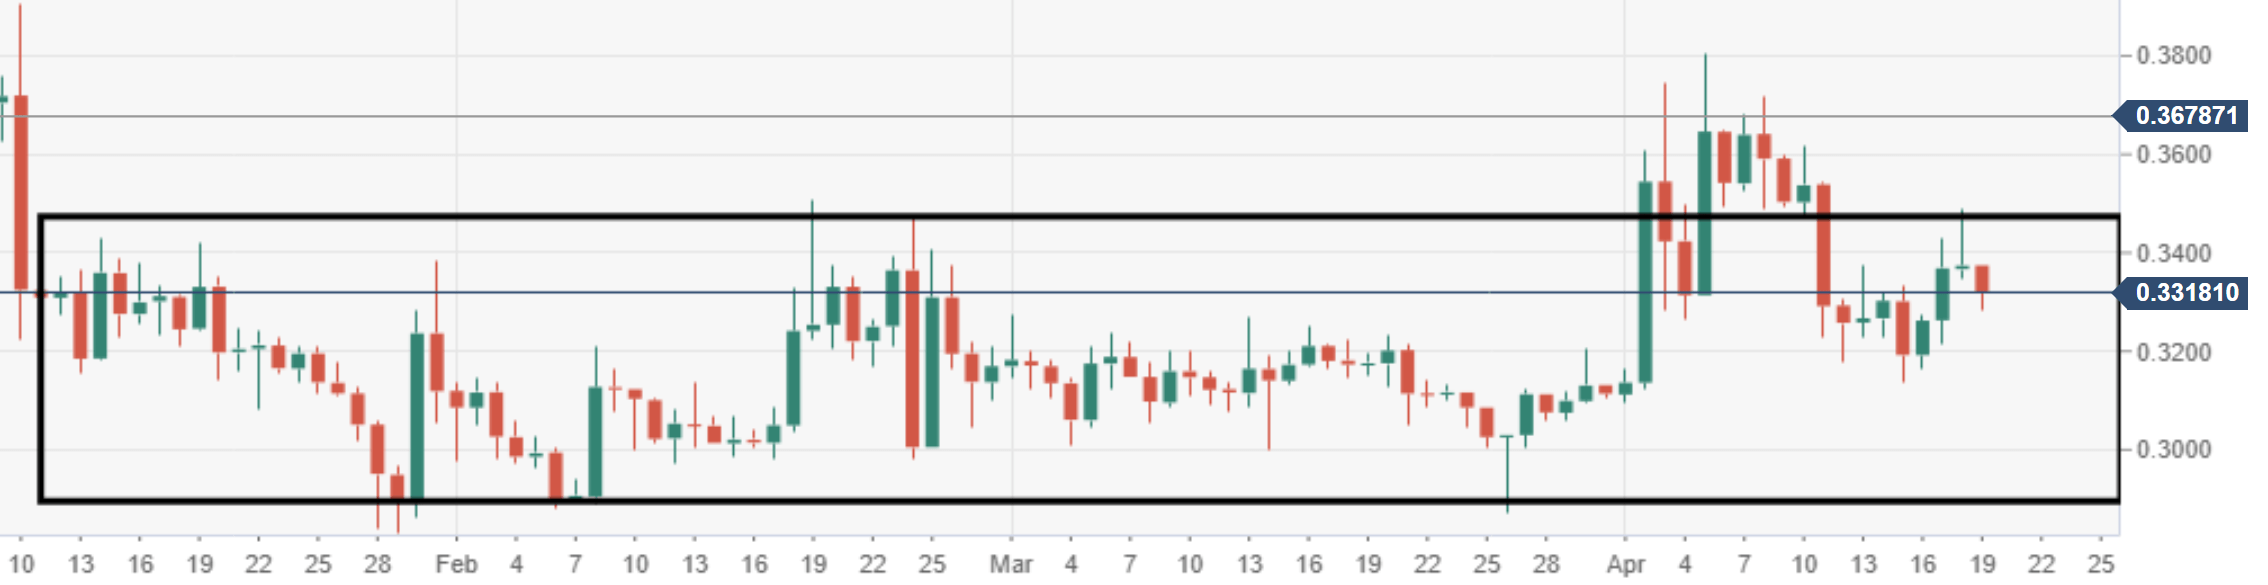 Ripple S Xrp Technical Analysis Xrp Usd 0 3000 Again Exposed - 